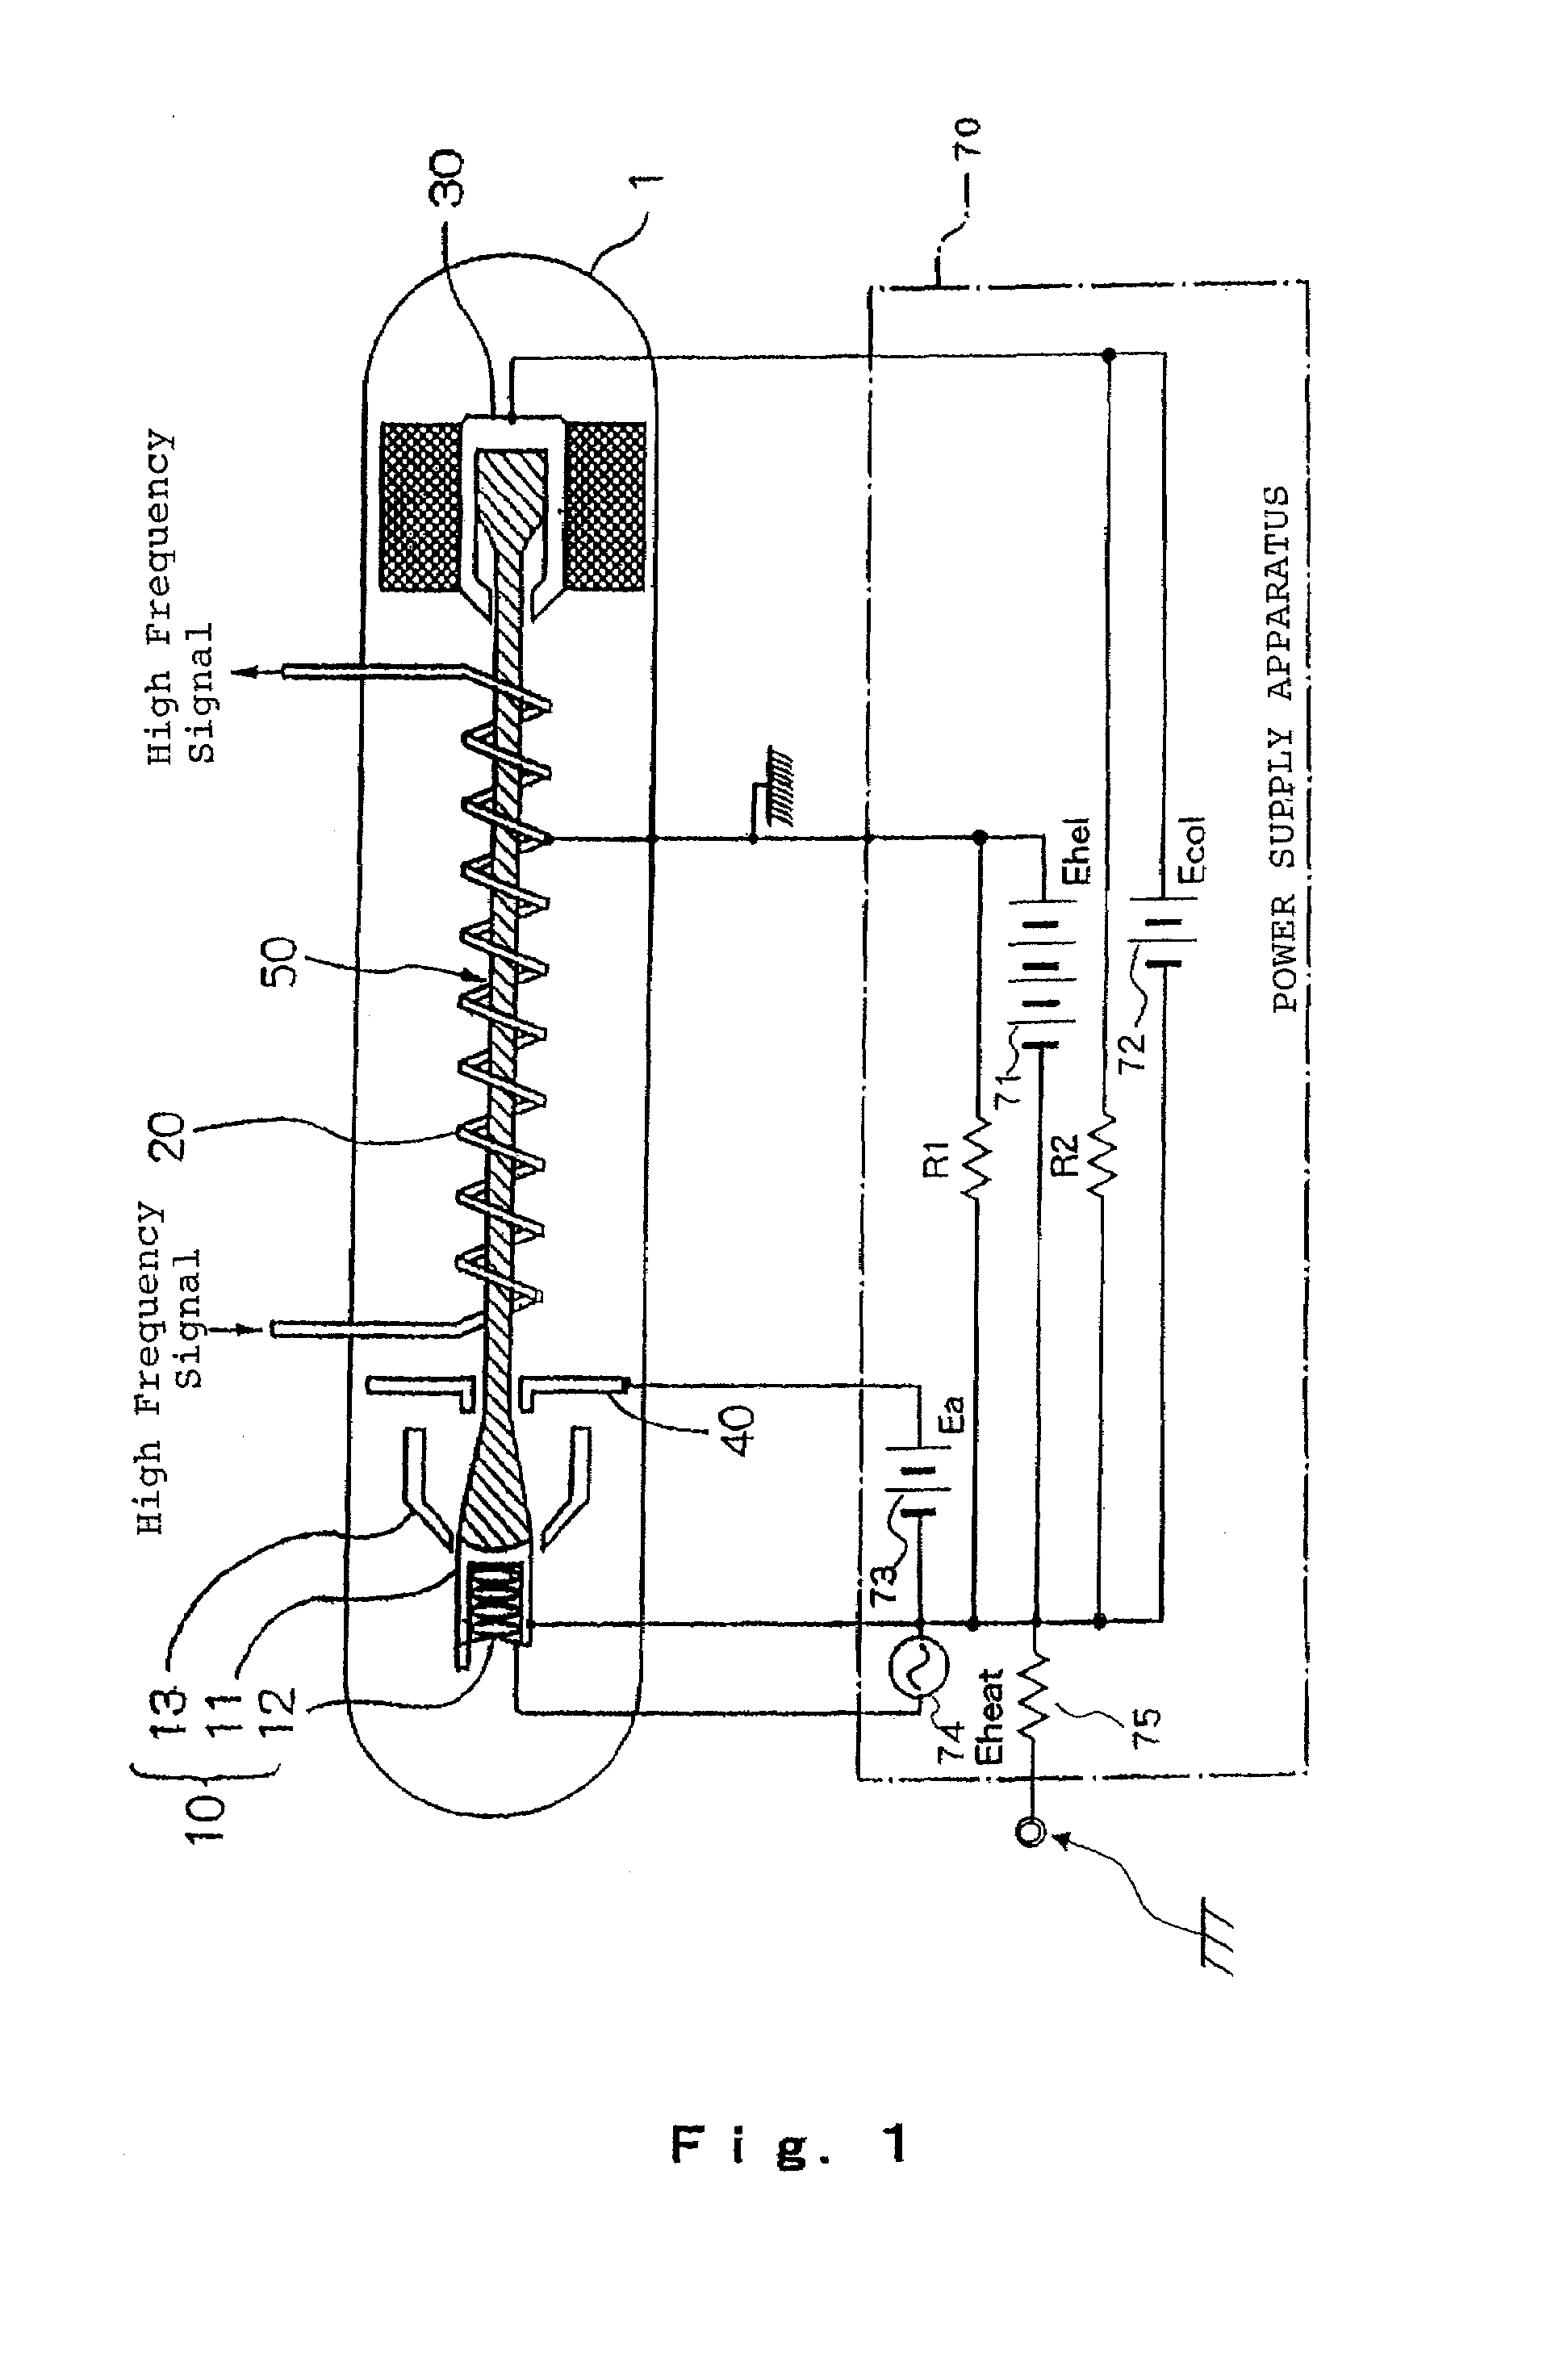 Power supply apparatus and high frequency circuit system